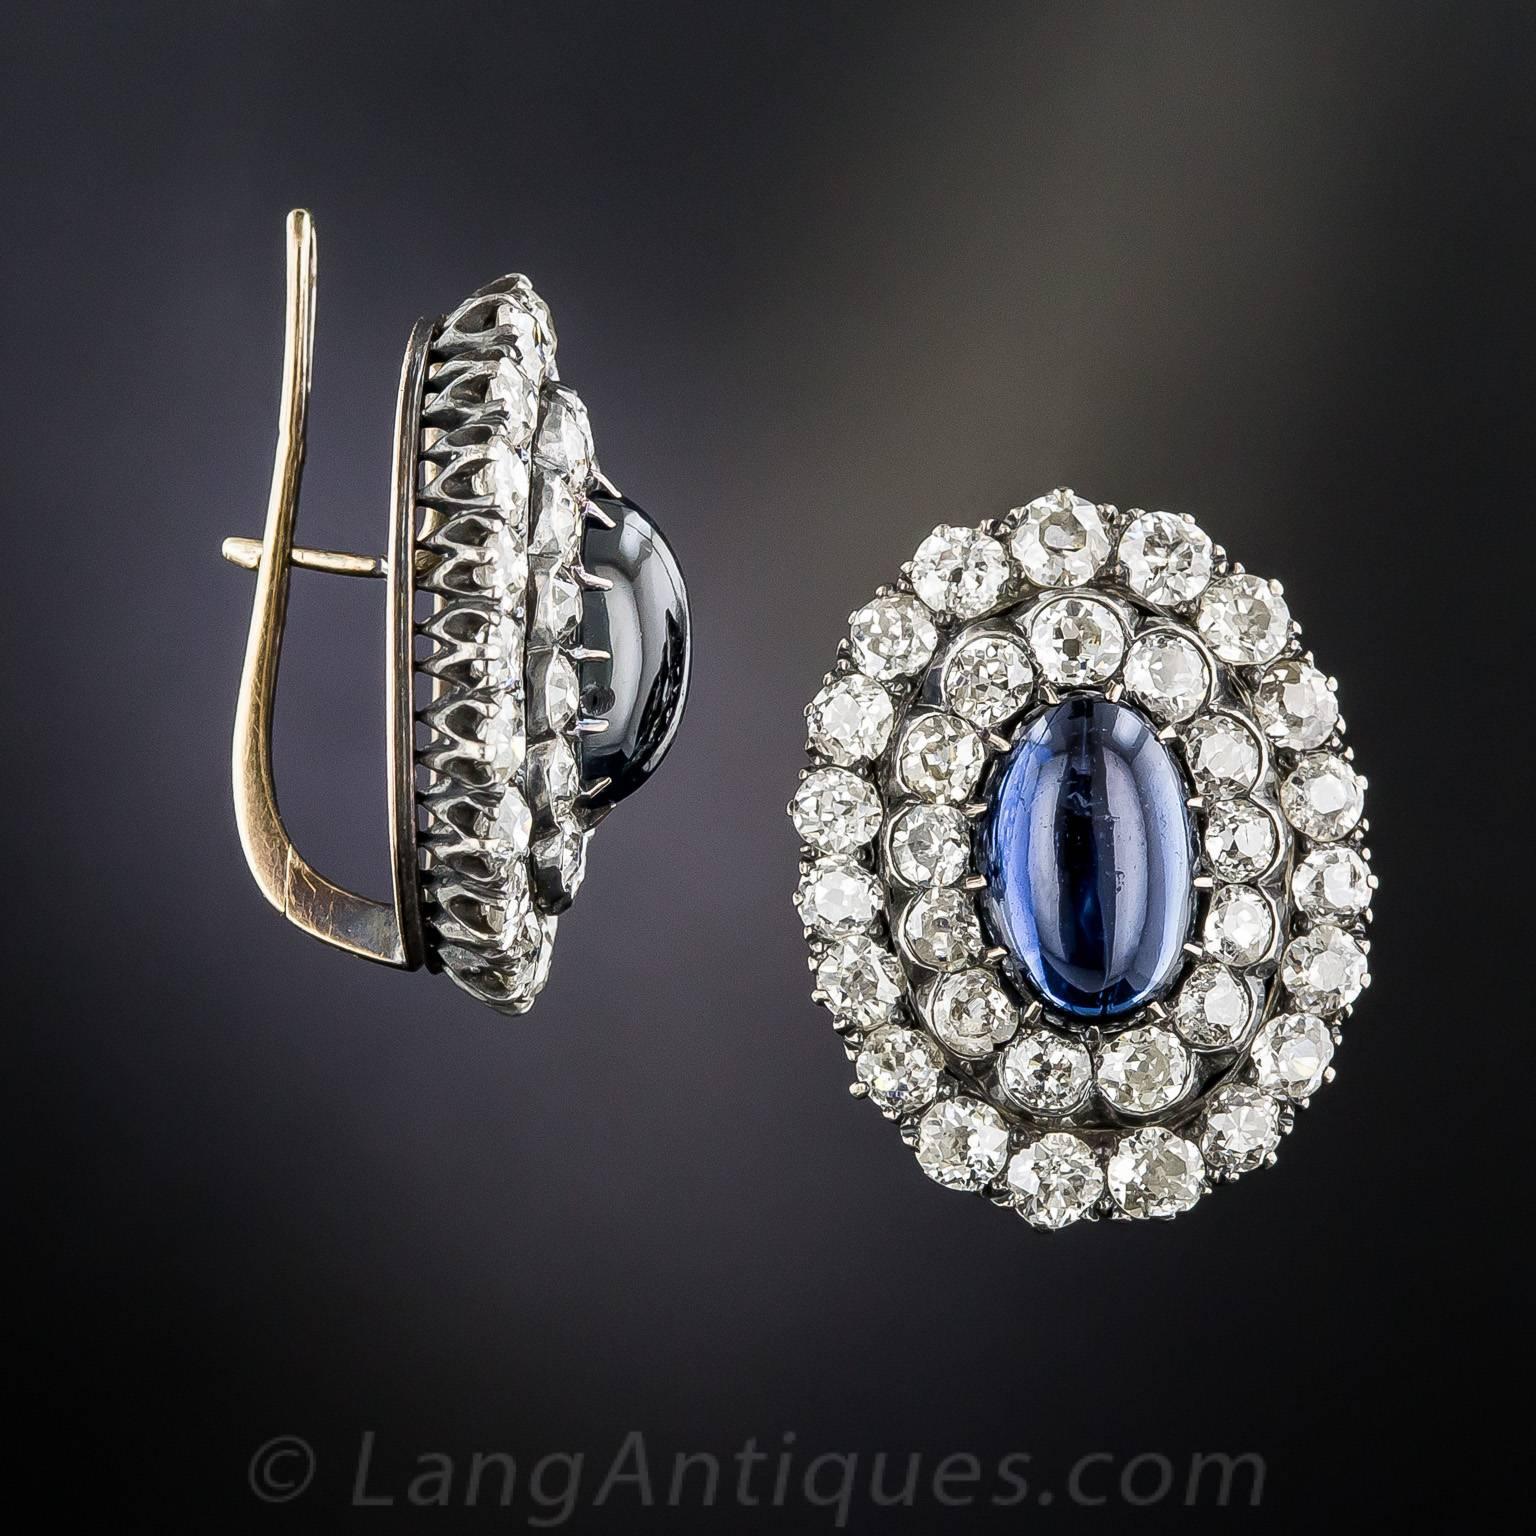 Late Victorian 1890s Antique Cabochon Sapphire Diamond Earrings For Sale